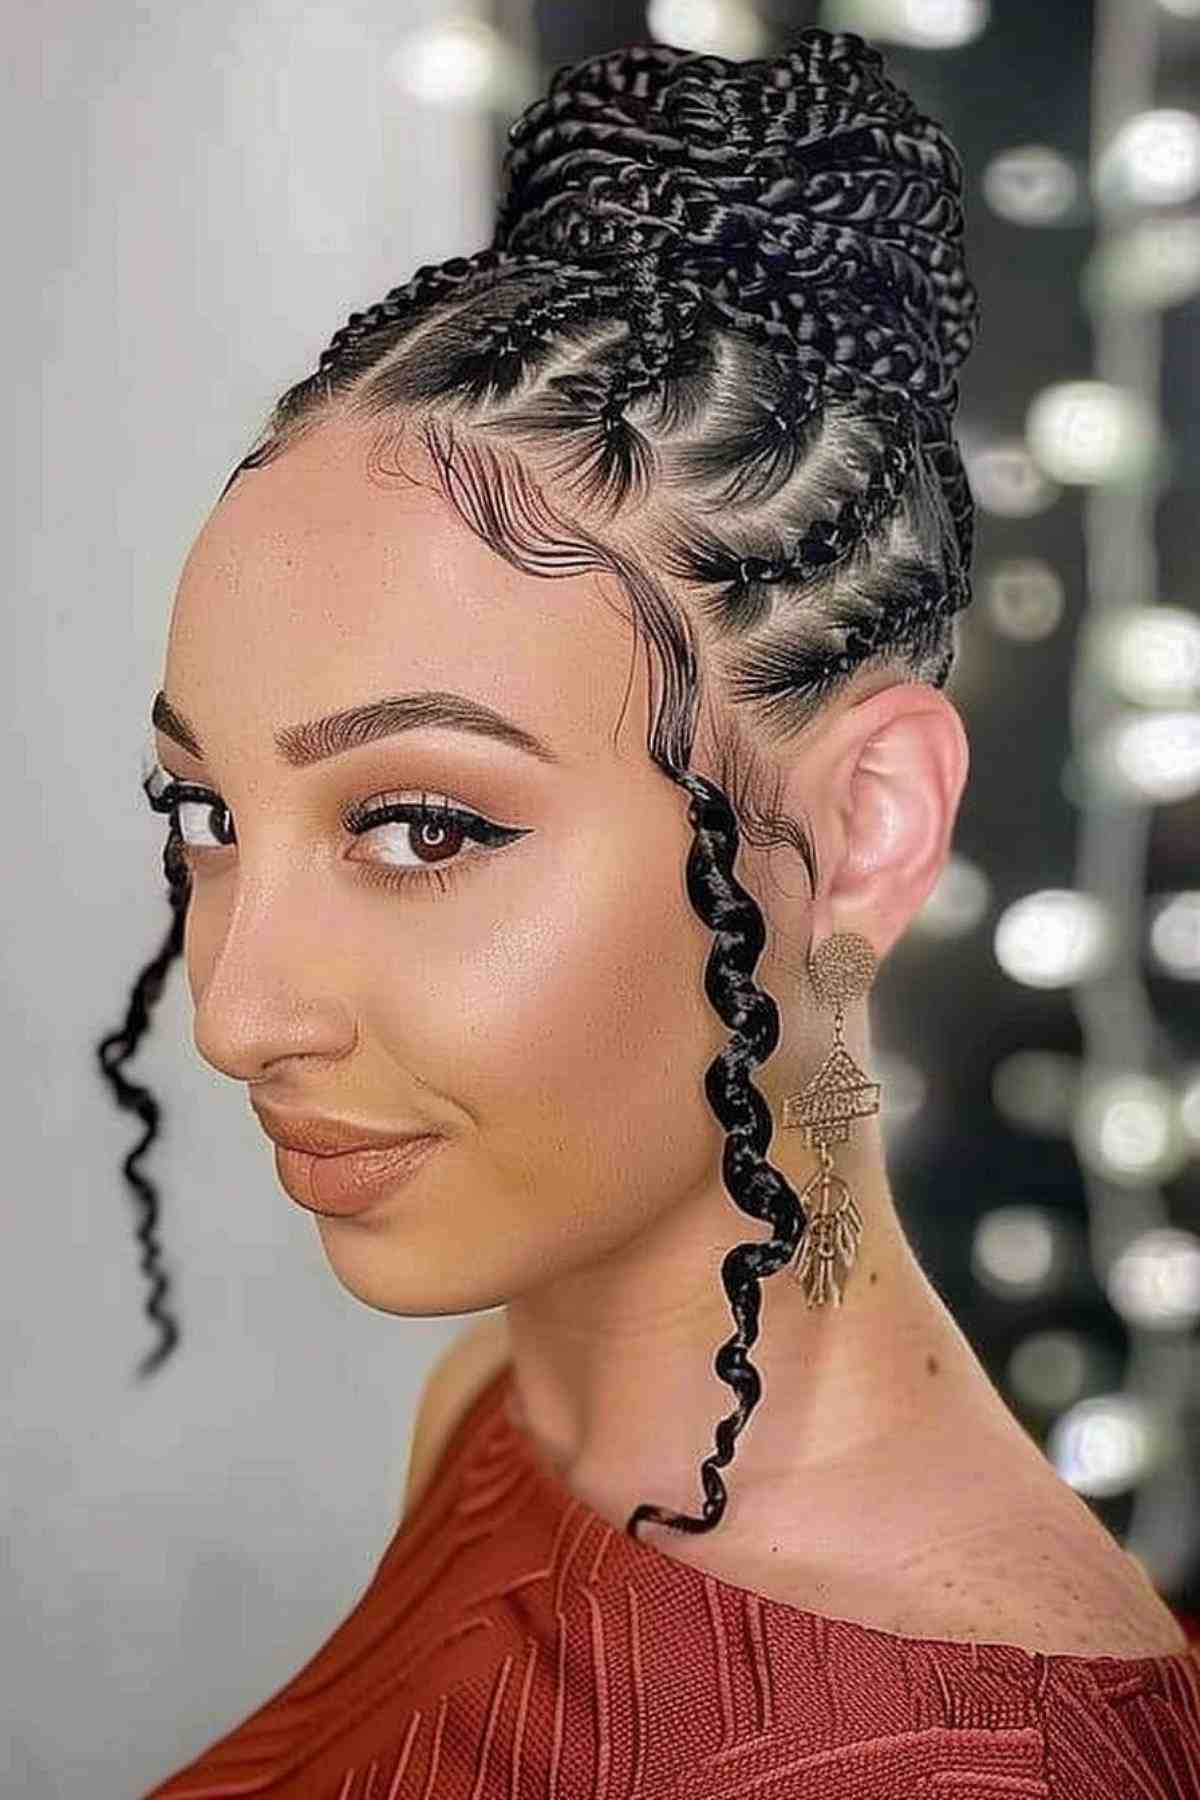 Boho-chic style with cornrow braids and a textured bun for a gala hairstyle.